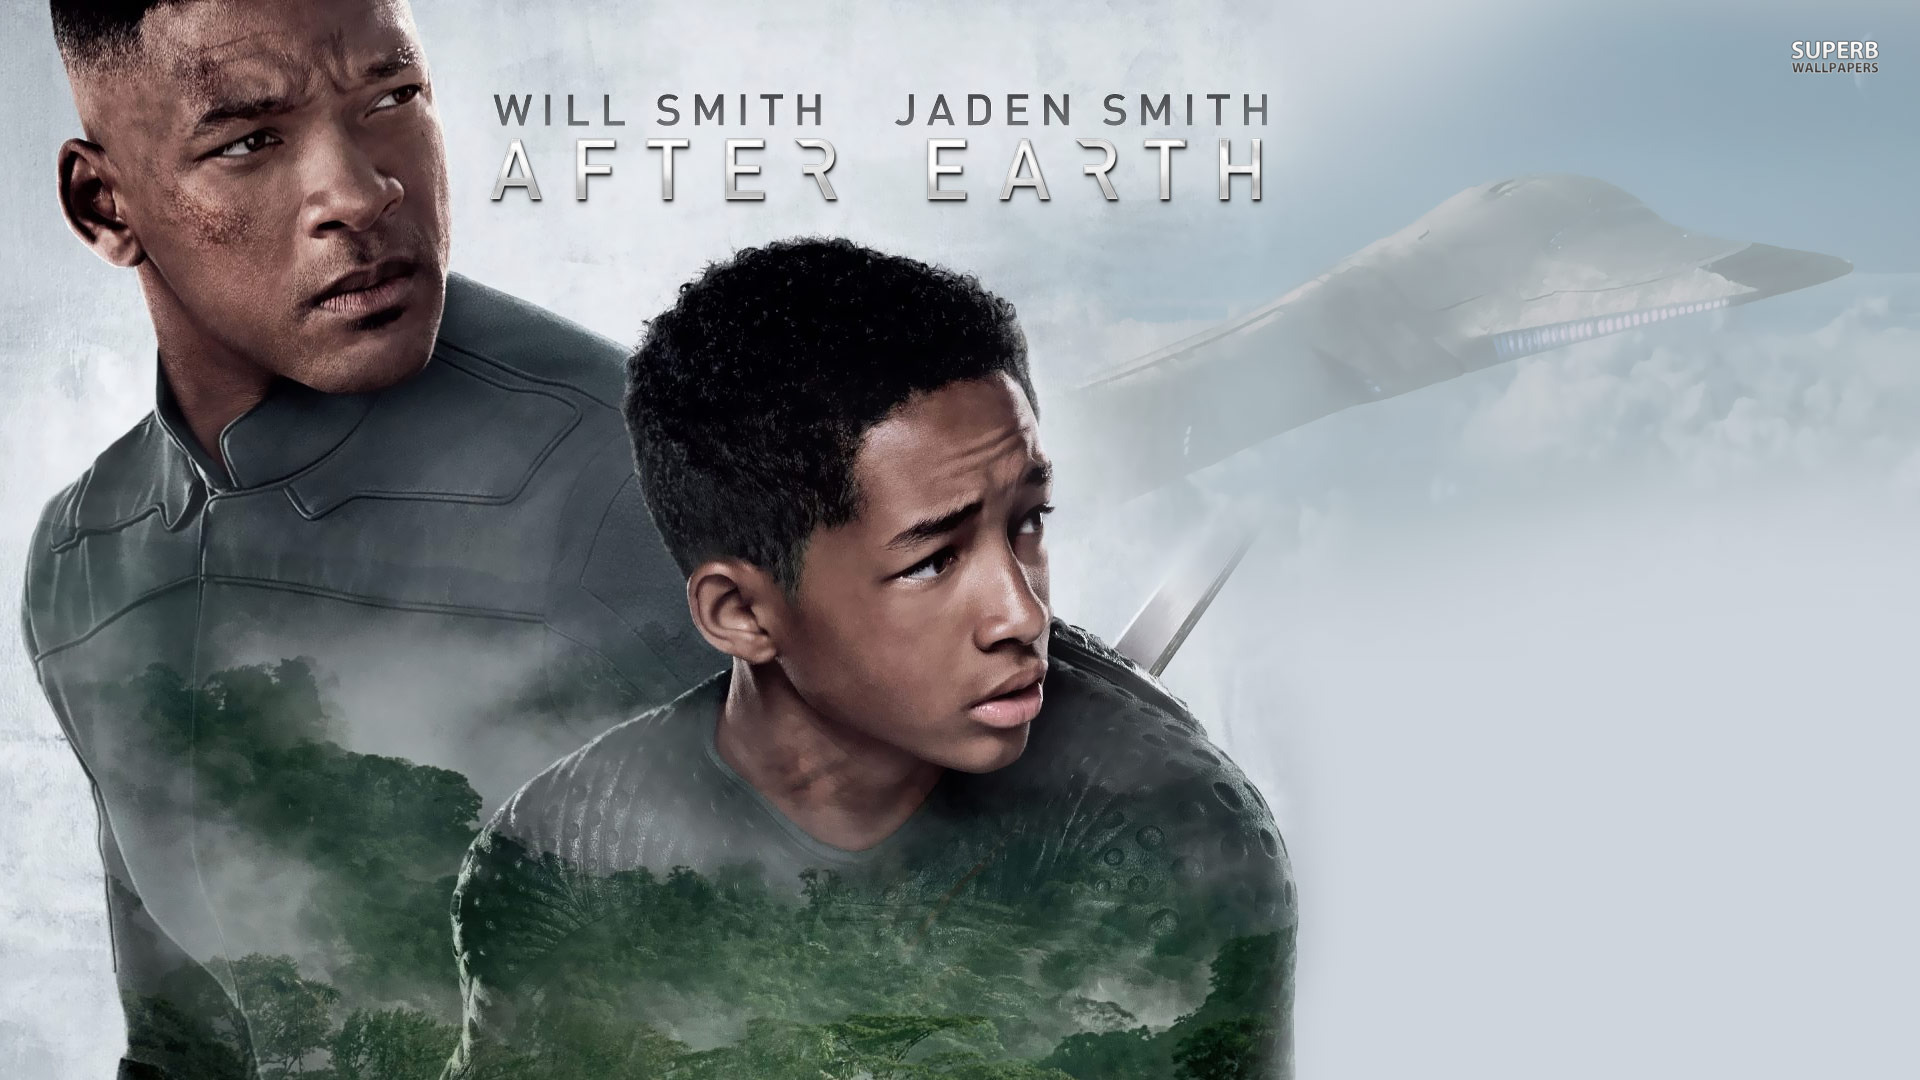 After Earth Backgrounds, Compatible - PC, Mobile, Gadgets| 1920x1080 px